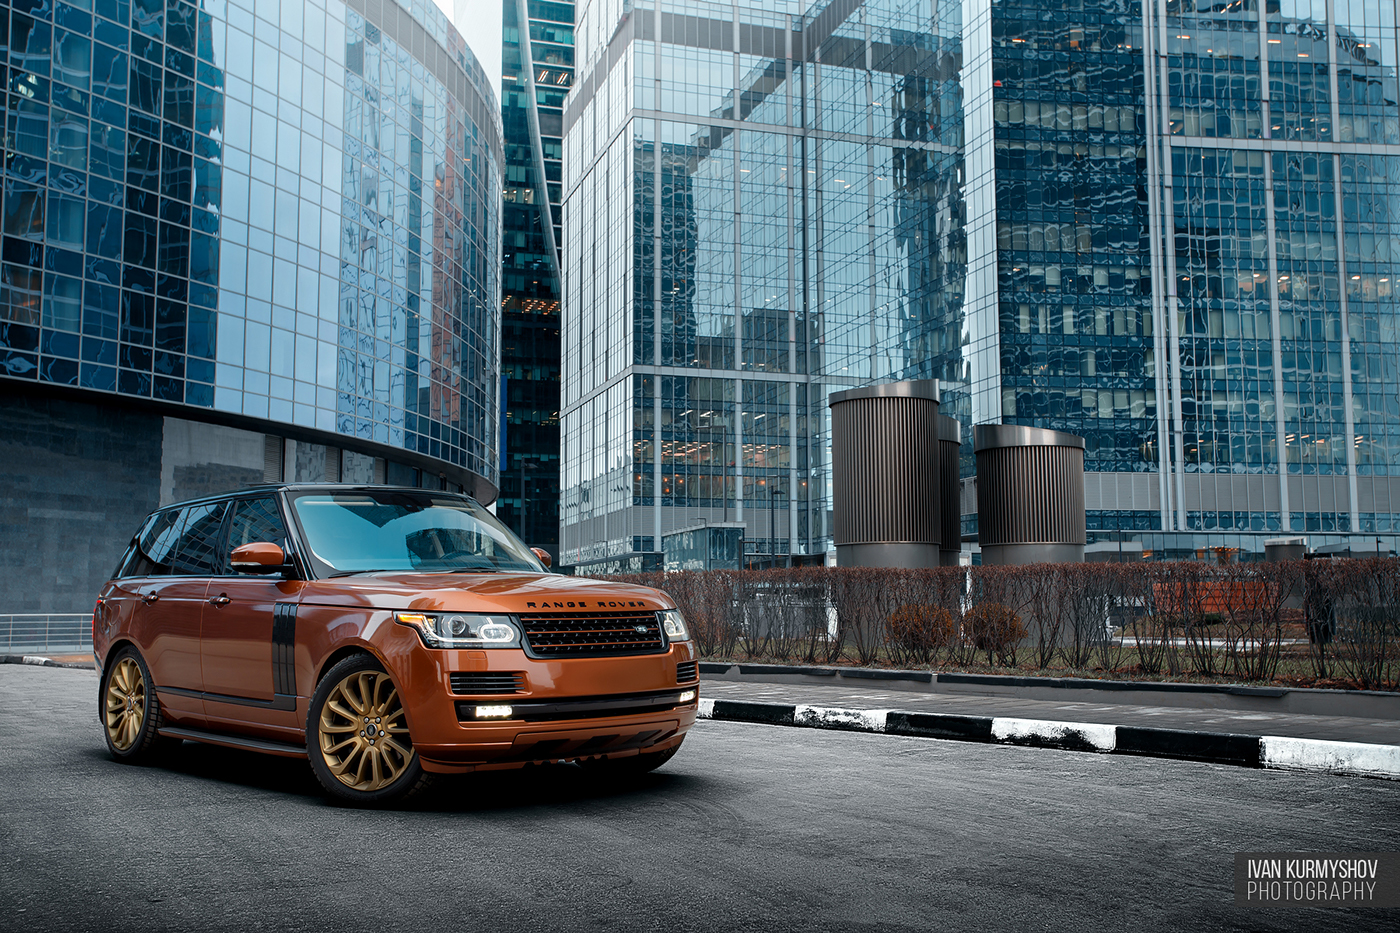 photo car automotive   Moscow-city Land Rover range rover Russia Moscow